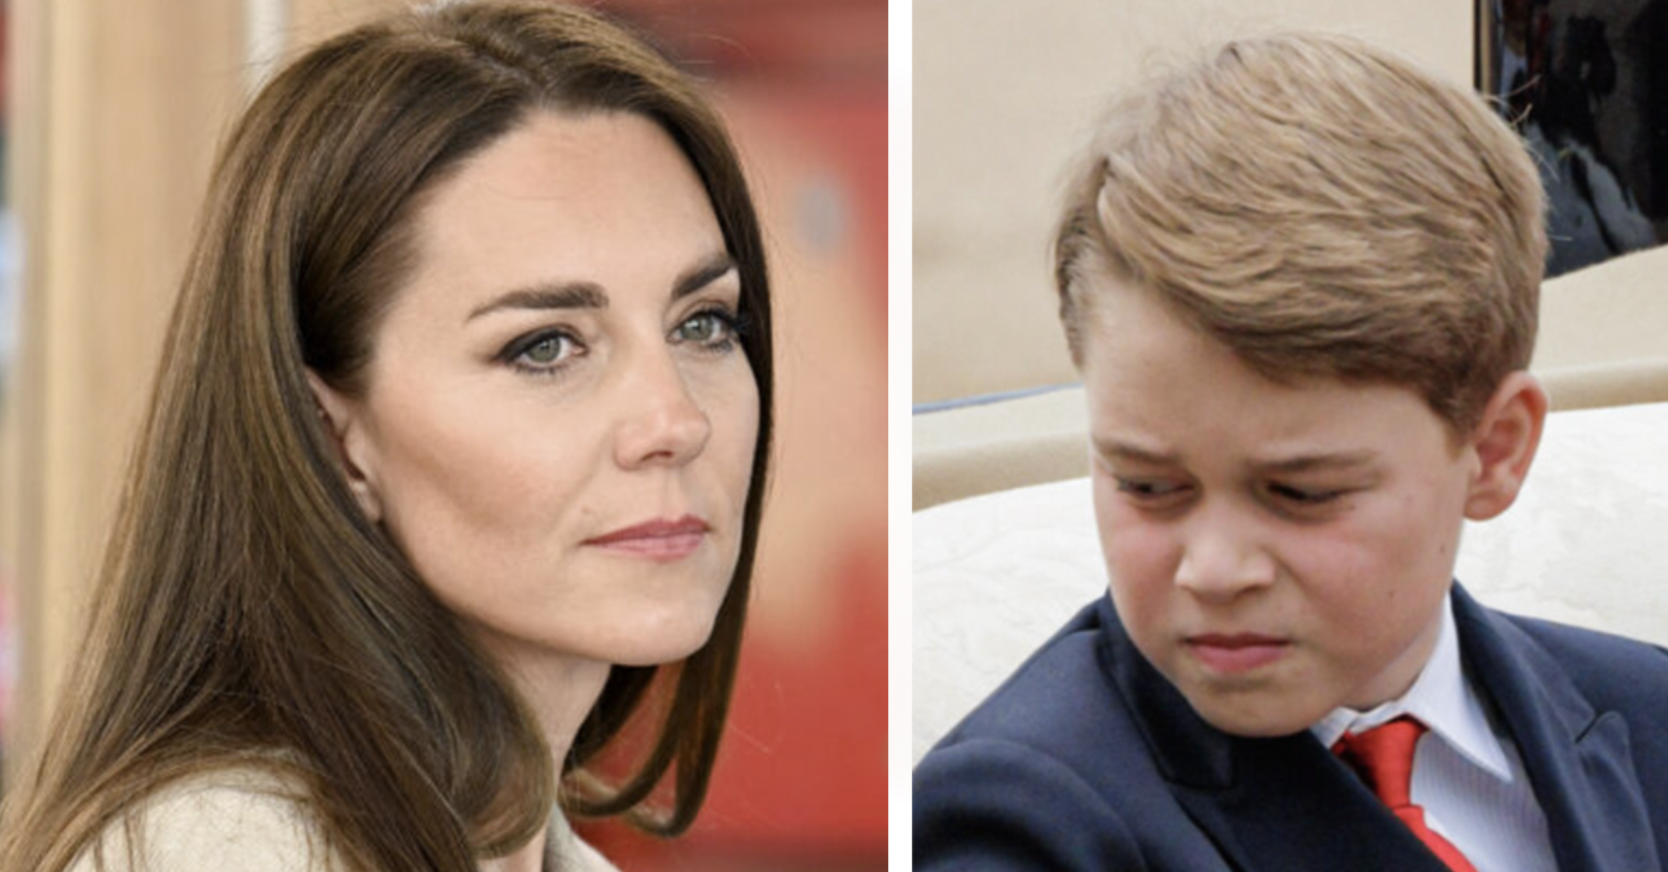 The Real Reason Kate Middleton Couldn’t Call her Mother After Prince George’s Birth